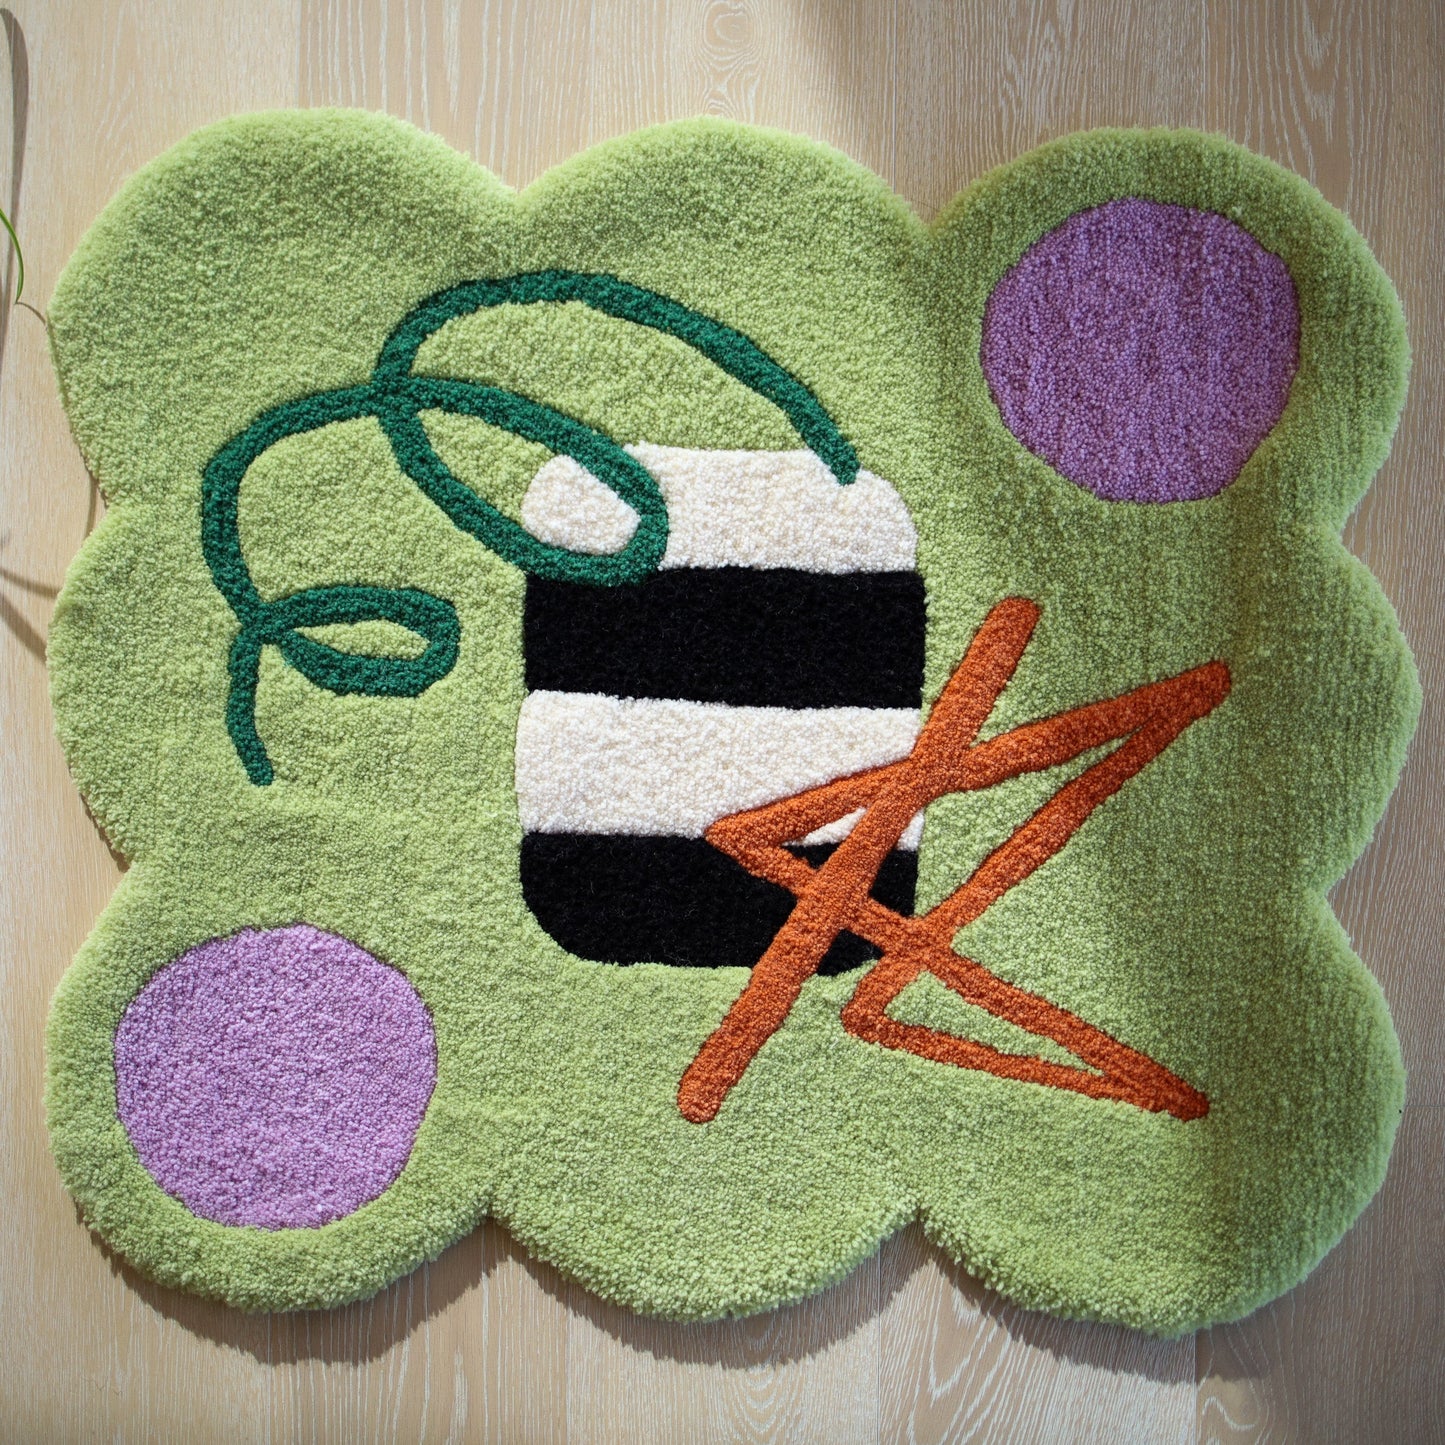 Artisan Series: "Toy Box" Tufted Rug by Emily Suvanvej